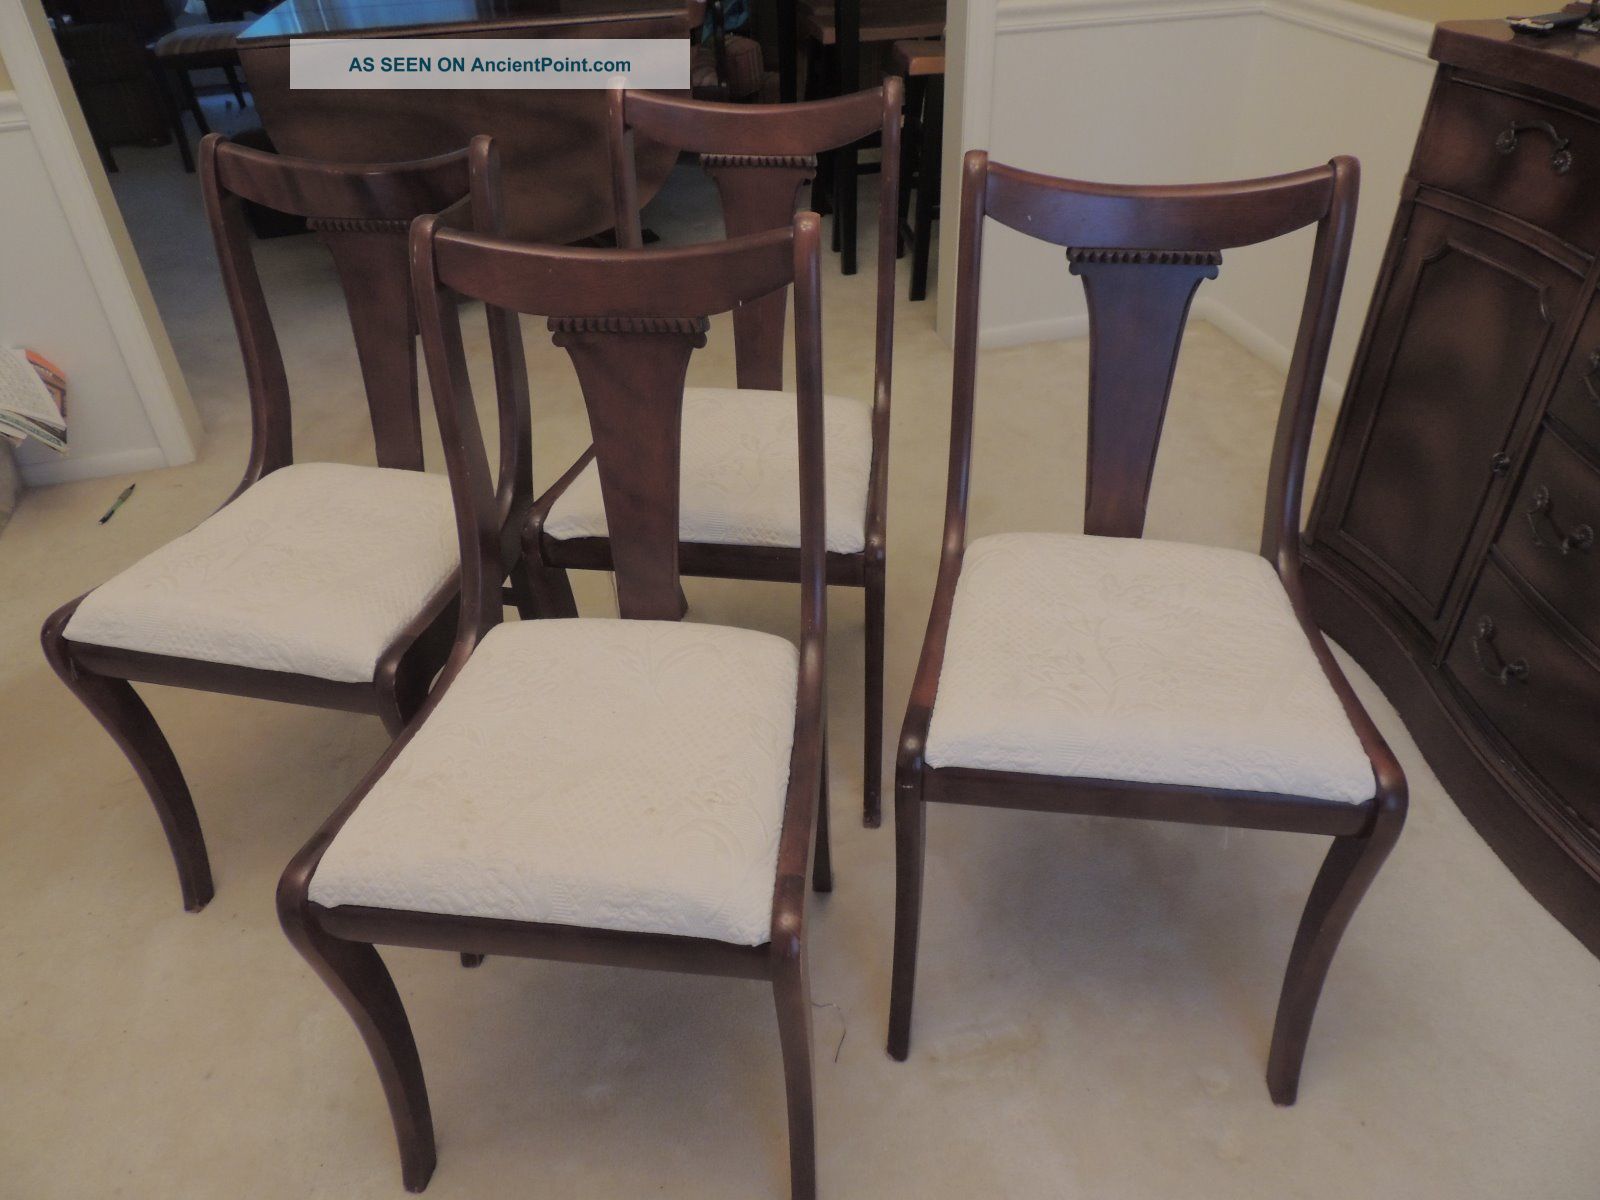 Antique Duncan Phyfe 1900 - 1950 Dining Chairs Unknown photo